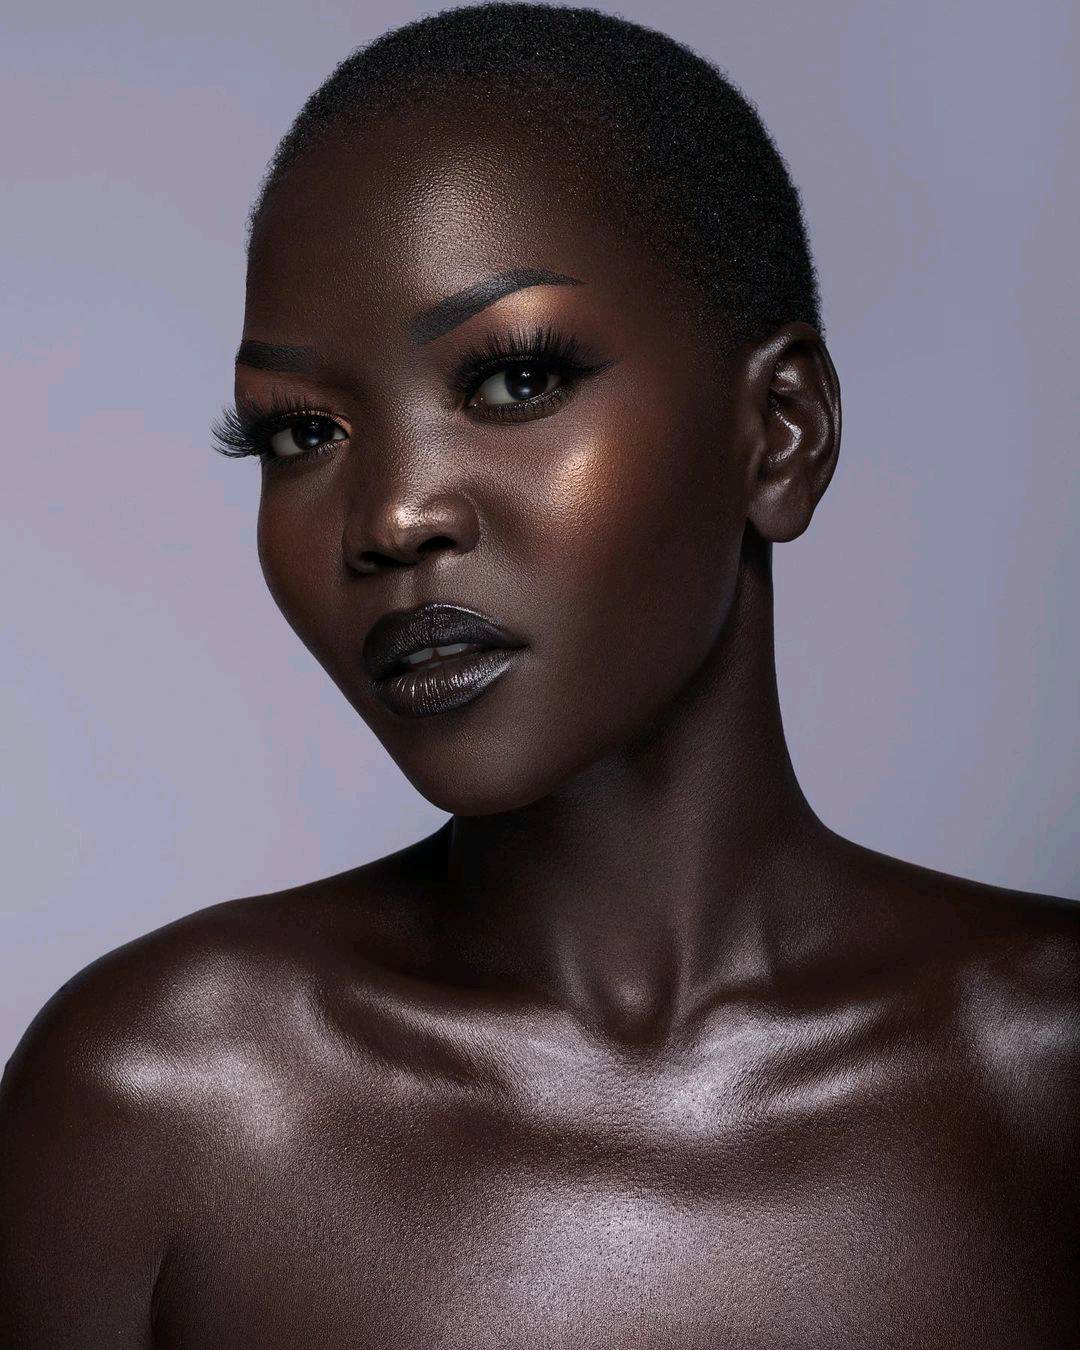 MOST BLACK BEAUTIFUL COLOR GIRL IN THE WORLD.